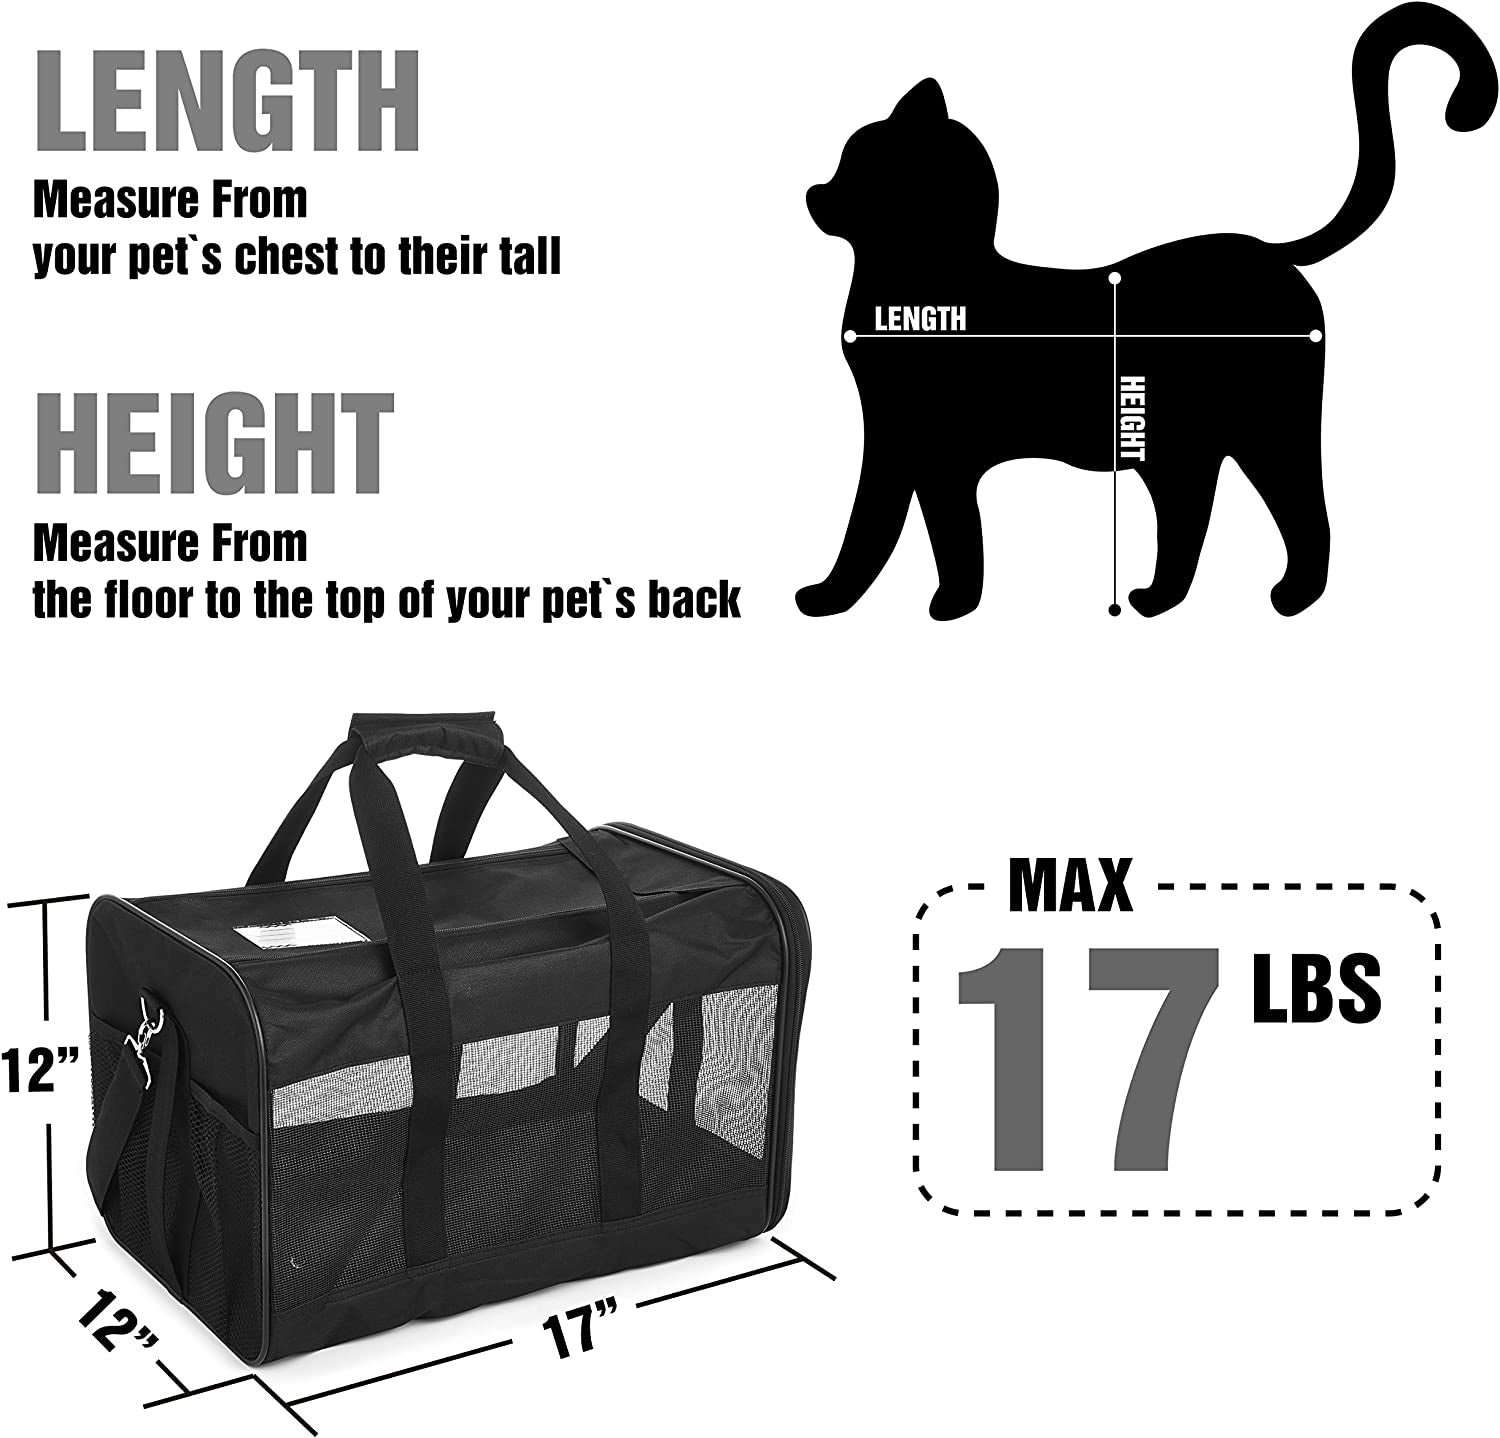 Pet Travel Carrier Soft Sided Portable Bag for Cats, Small Dogs, Kittens or Puppies, Collapsible, Durable, Airline Approved, Travel Friendly, Carry Your Pet with You Safely and Comfortably